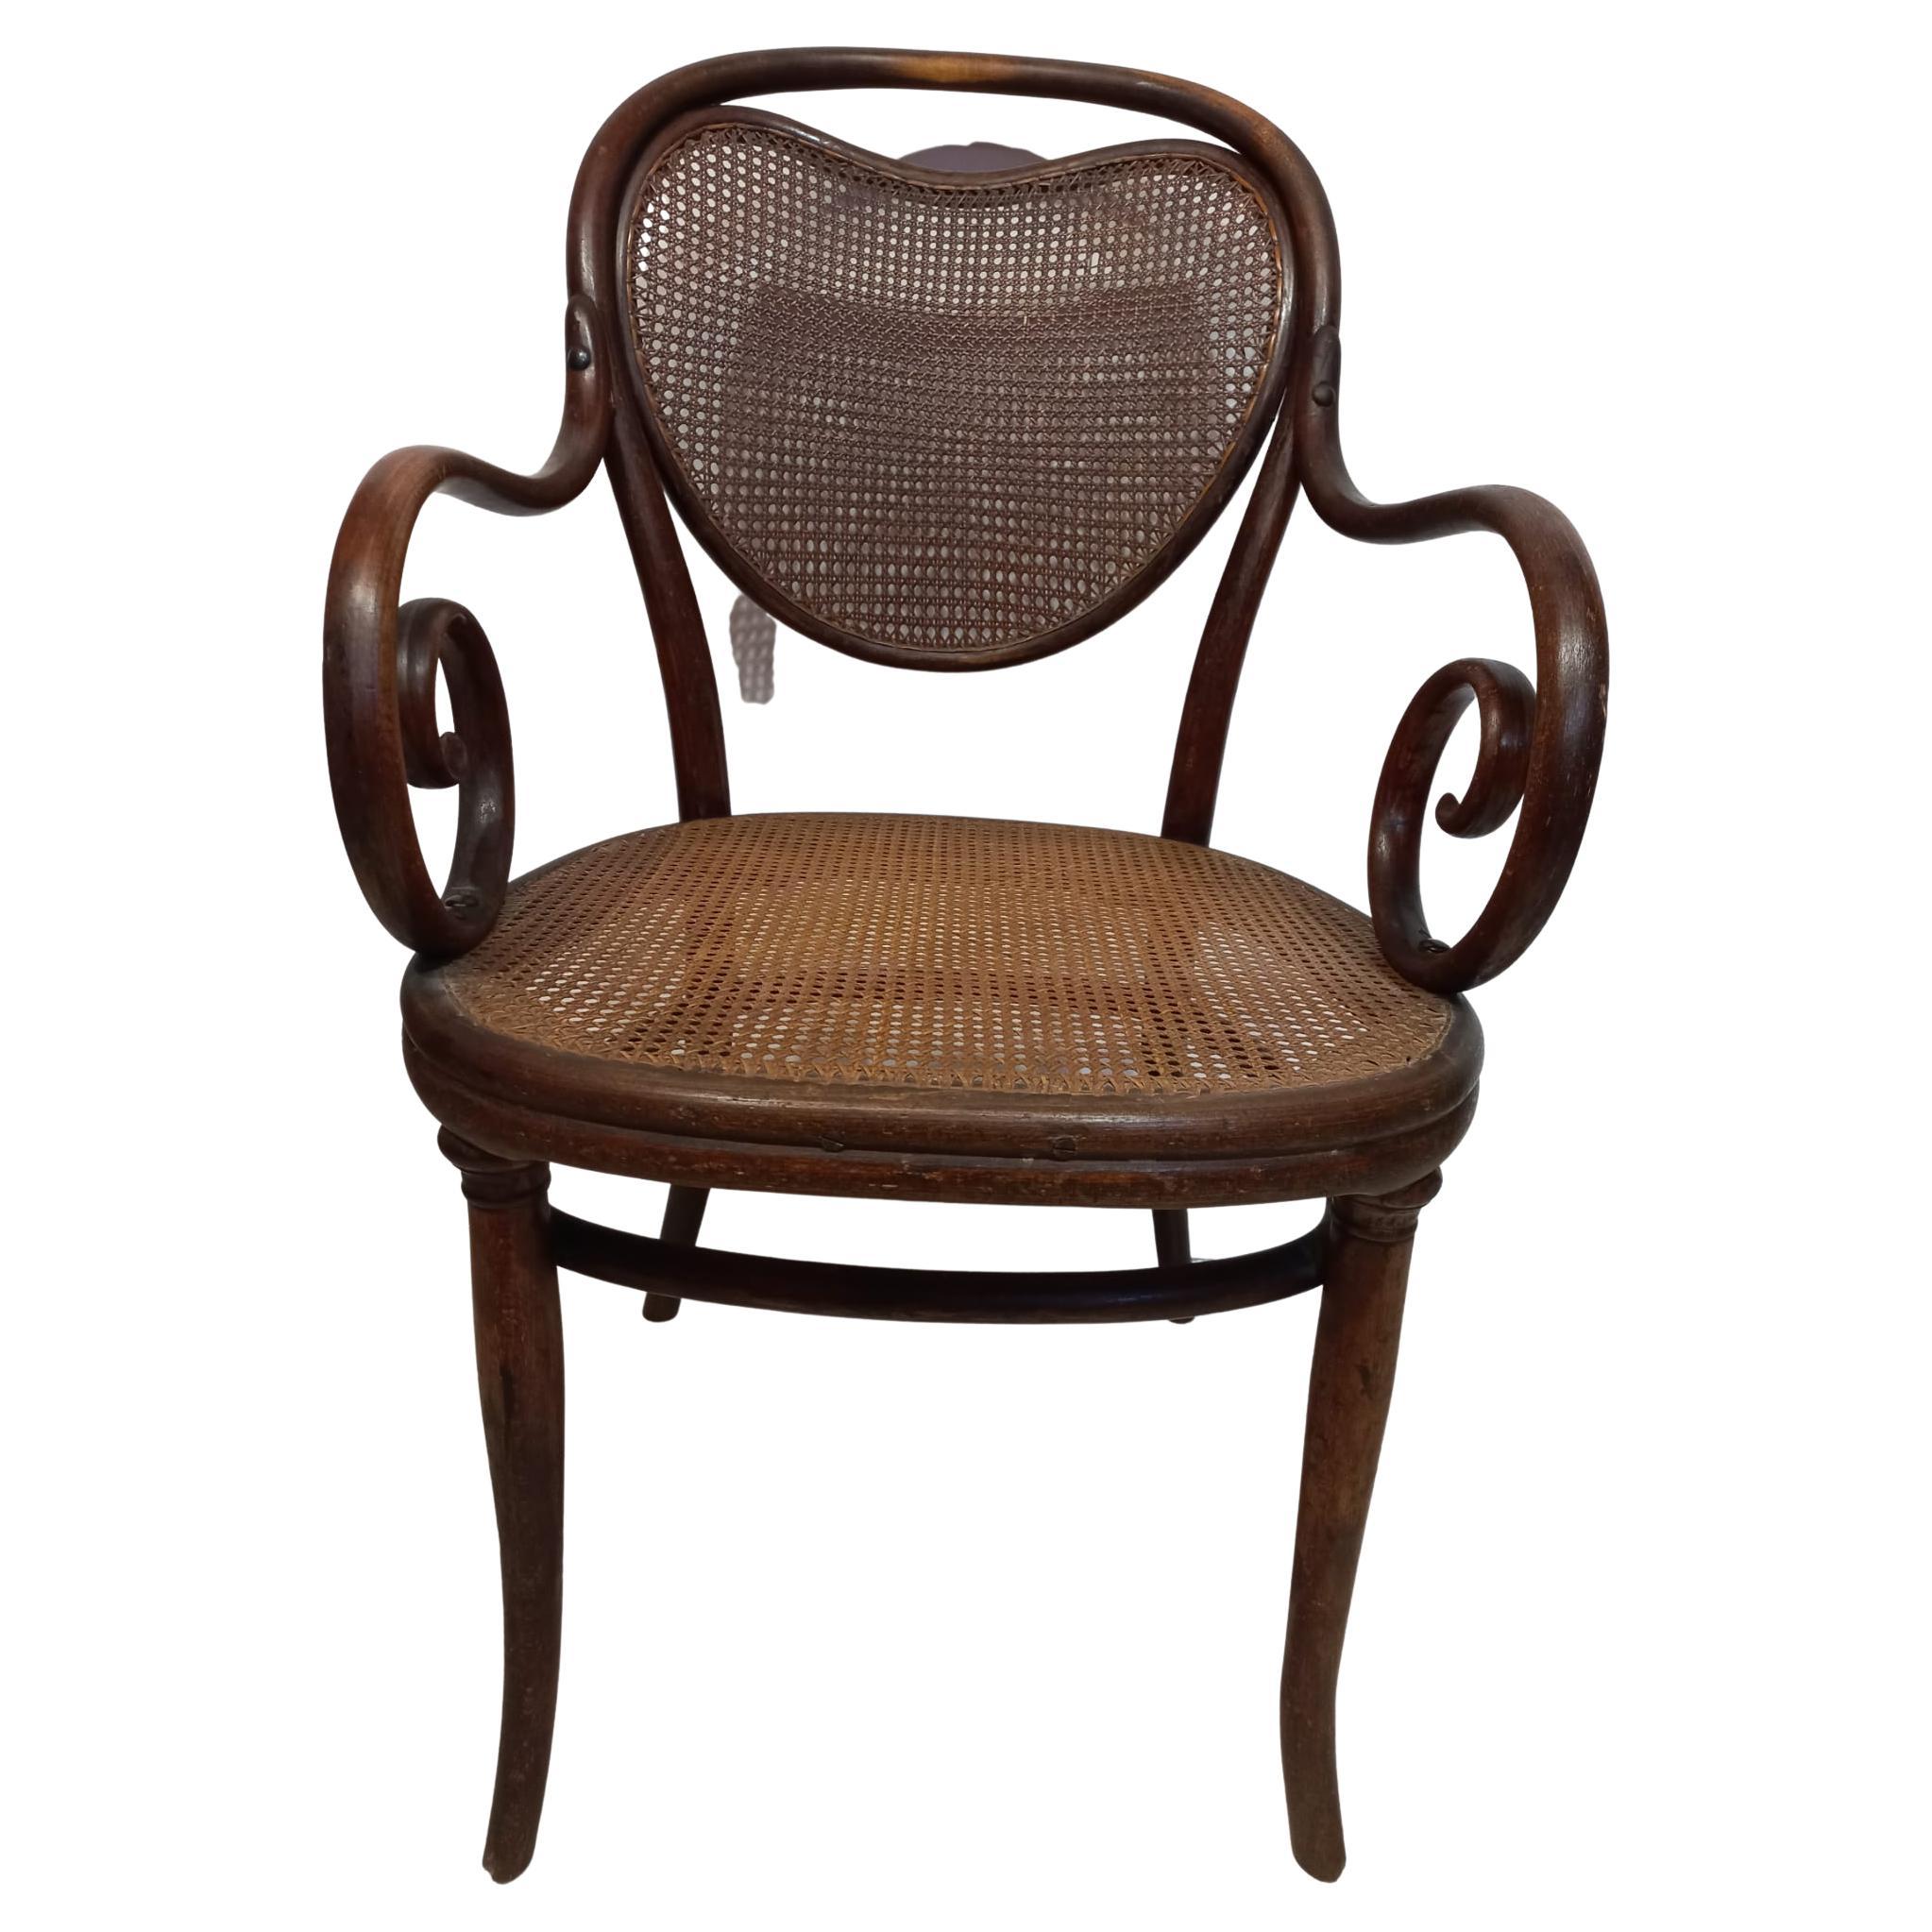 Thonet chair from the 1870s with curved armrests For Sale 4